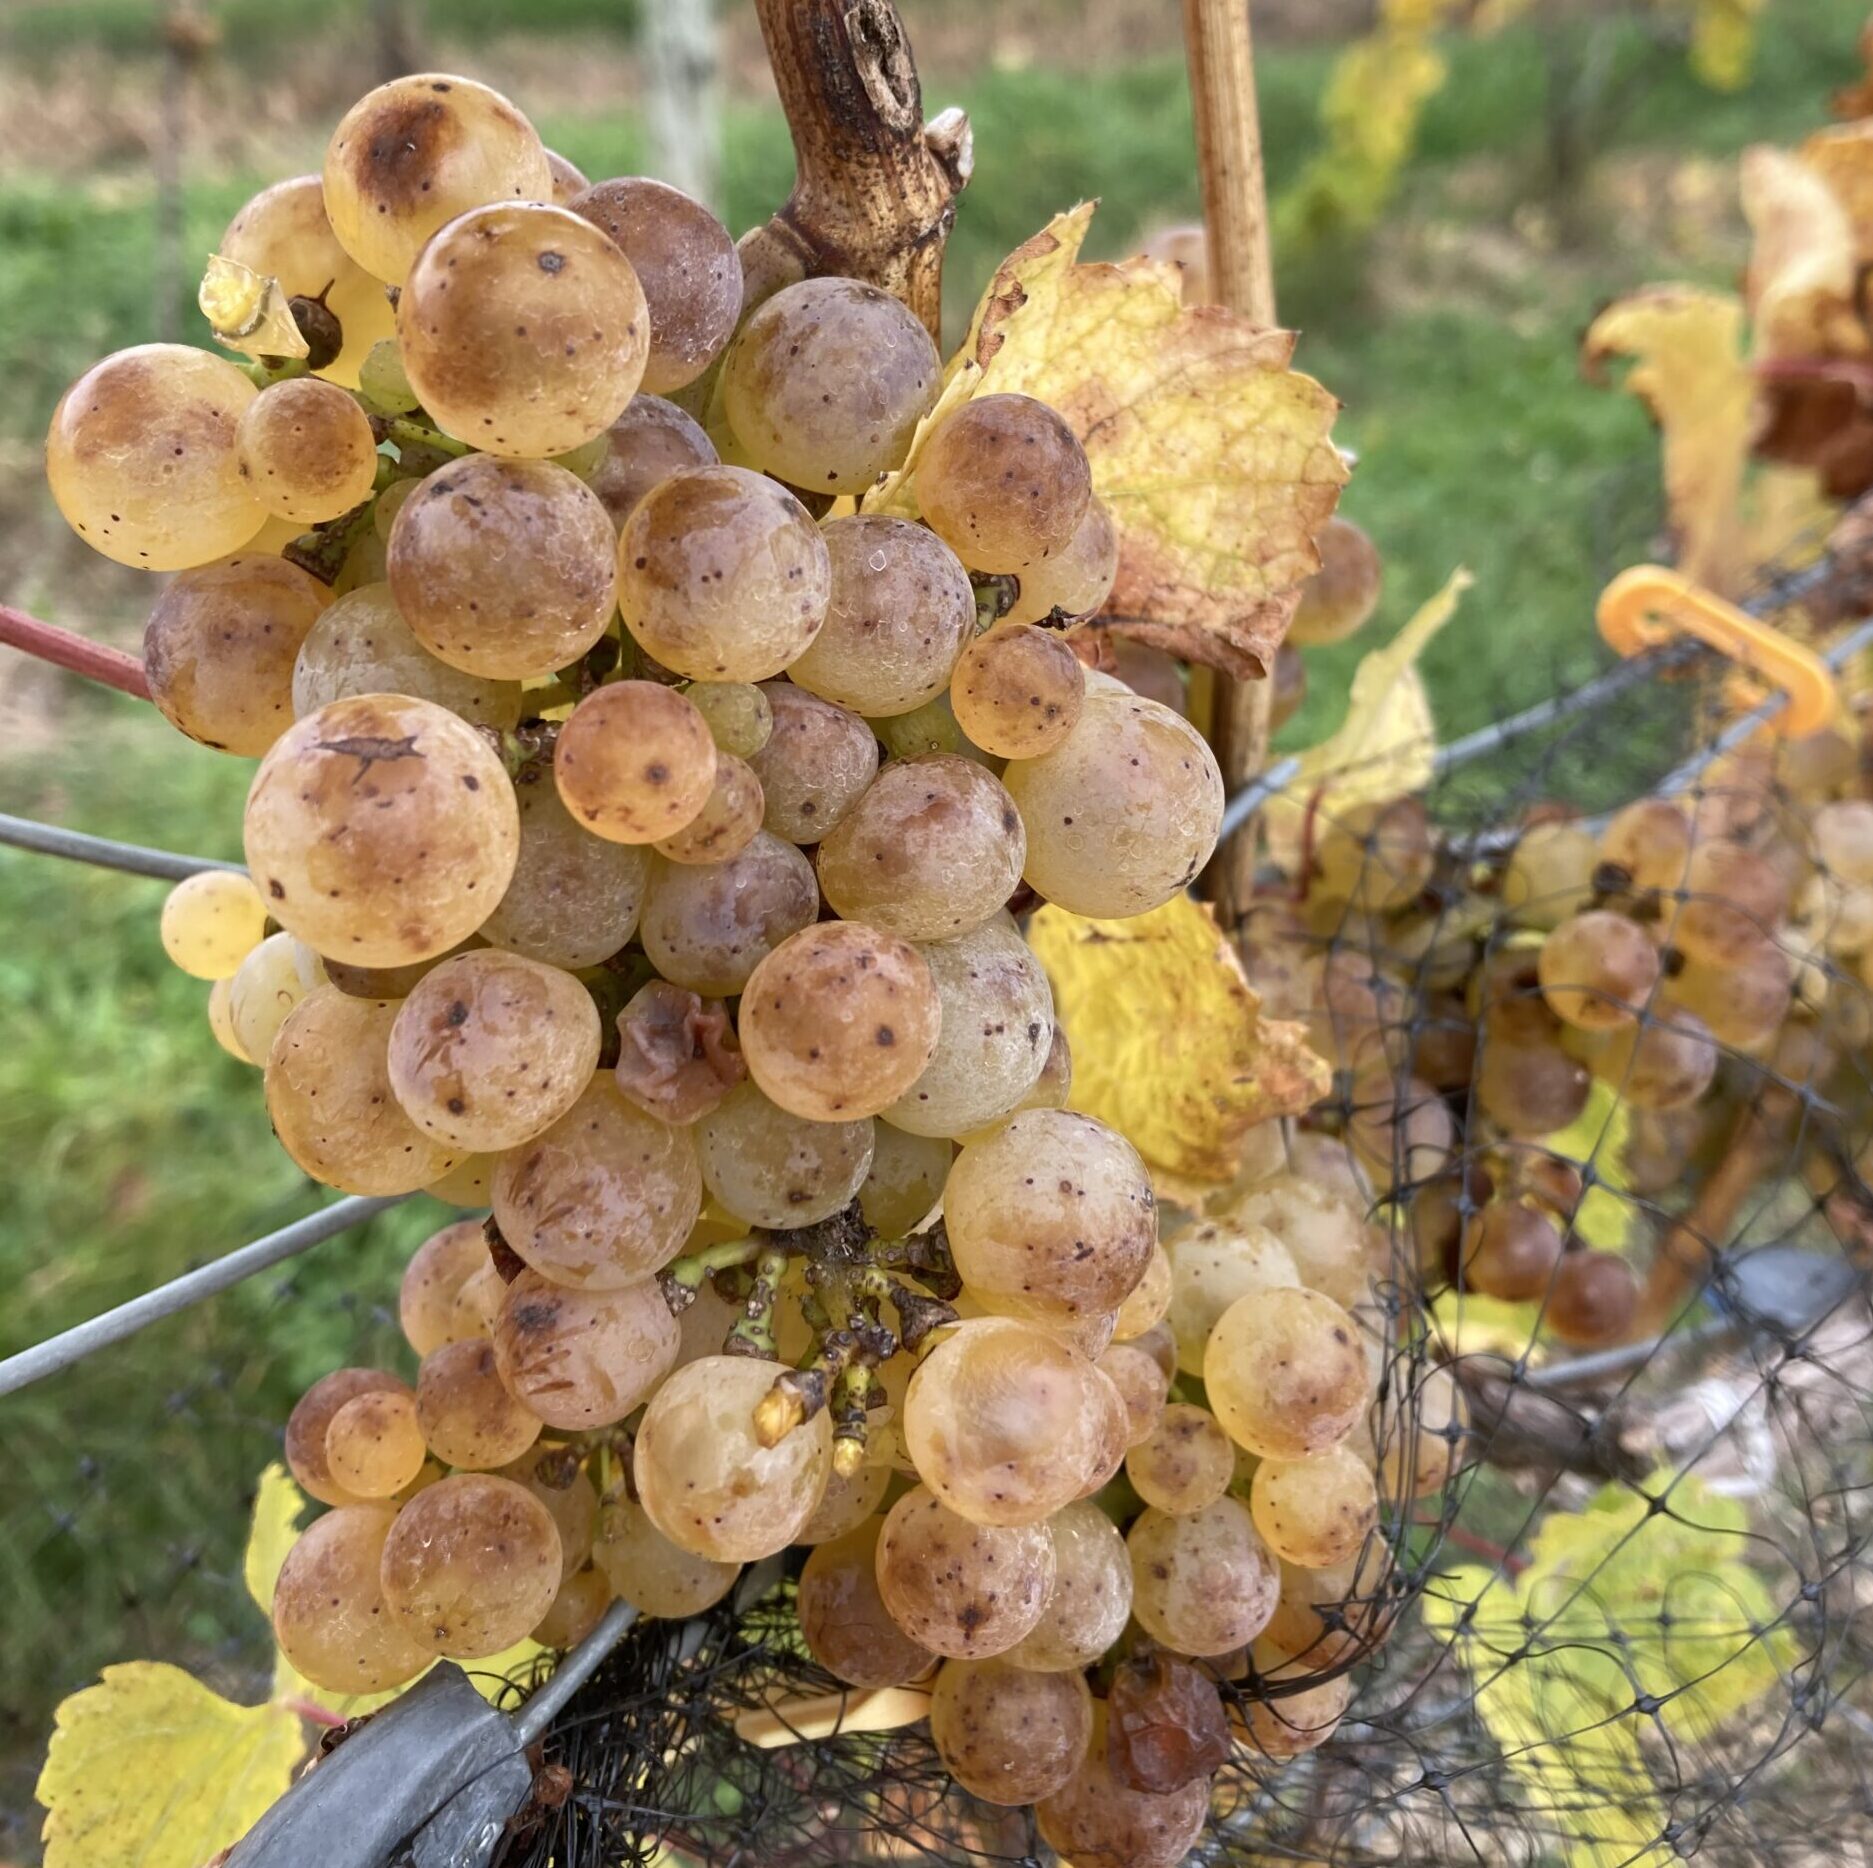 Riesling grapes during harvest.